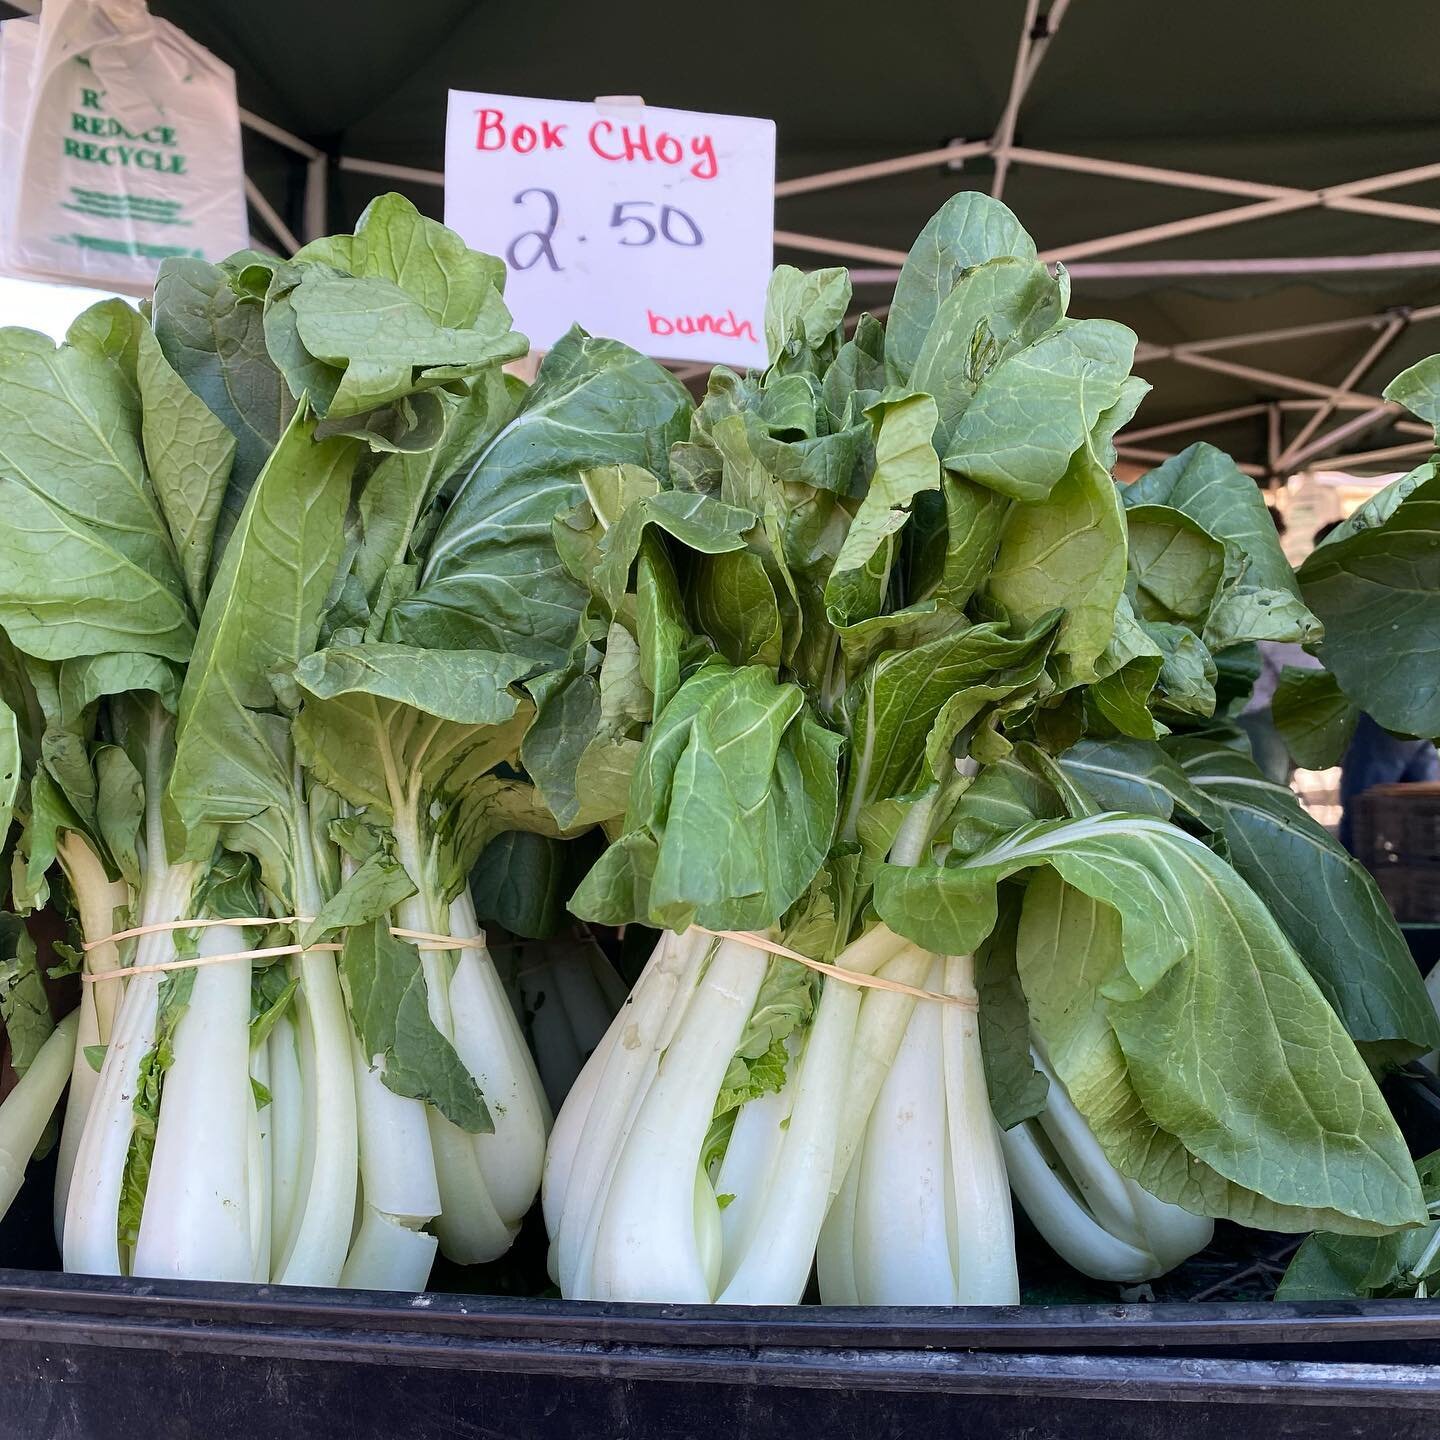 Bok choy grows well in vertical farming applications. Singapore is home to several commercial operations with growing towers stacked 30 feet in the air.

Bok choy has a mild, sweet flavor and a crispy texture. It&rsquo;s in season during cold weather